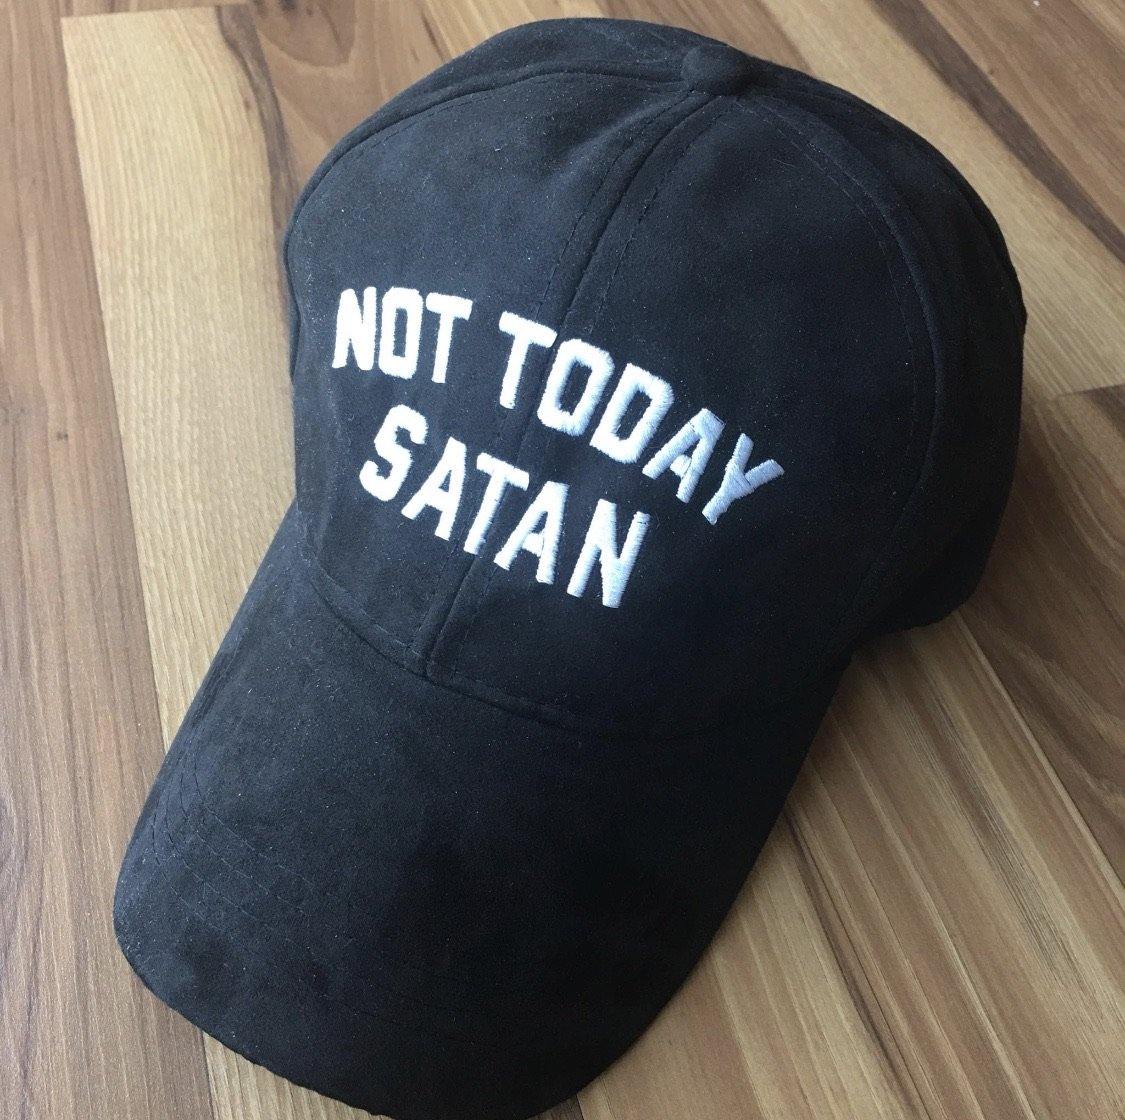 Hats { Not today satan } Embroidered distressed caps. Trucker. Unisex. Ultra suede. 9 colors! - Stacy's Pink Martini Boutique